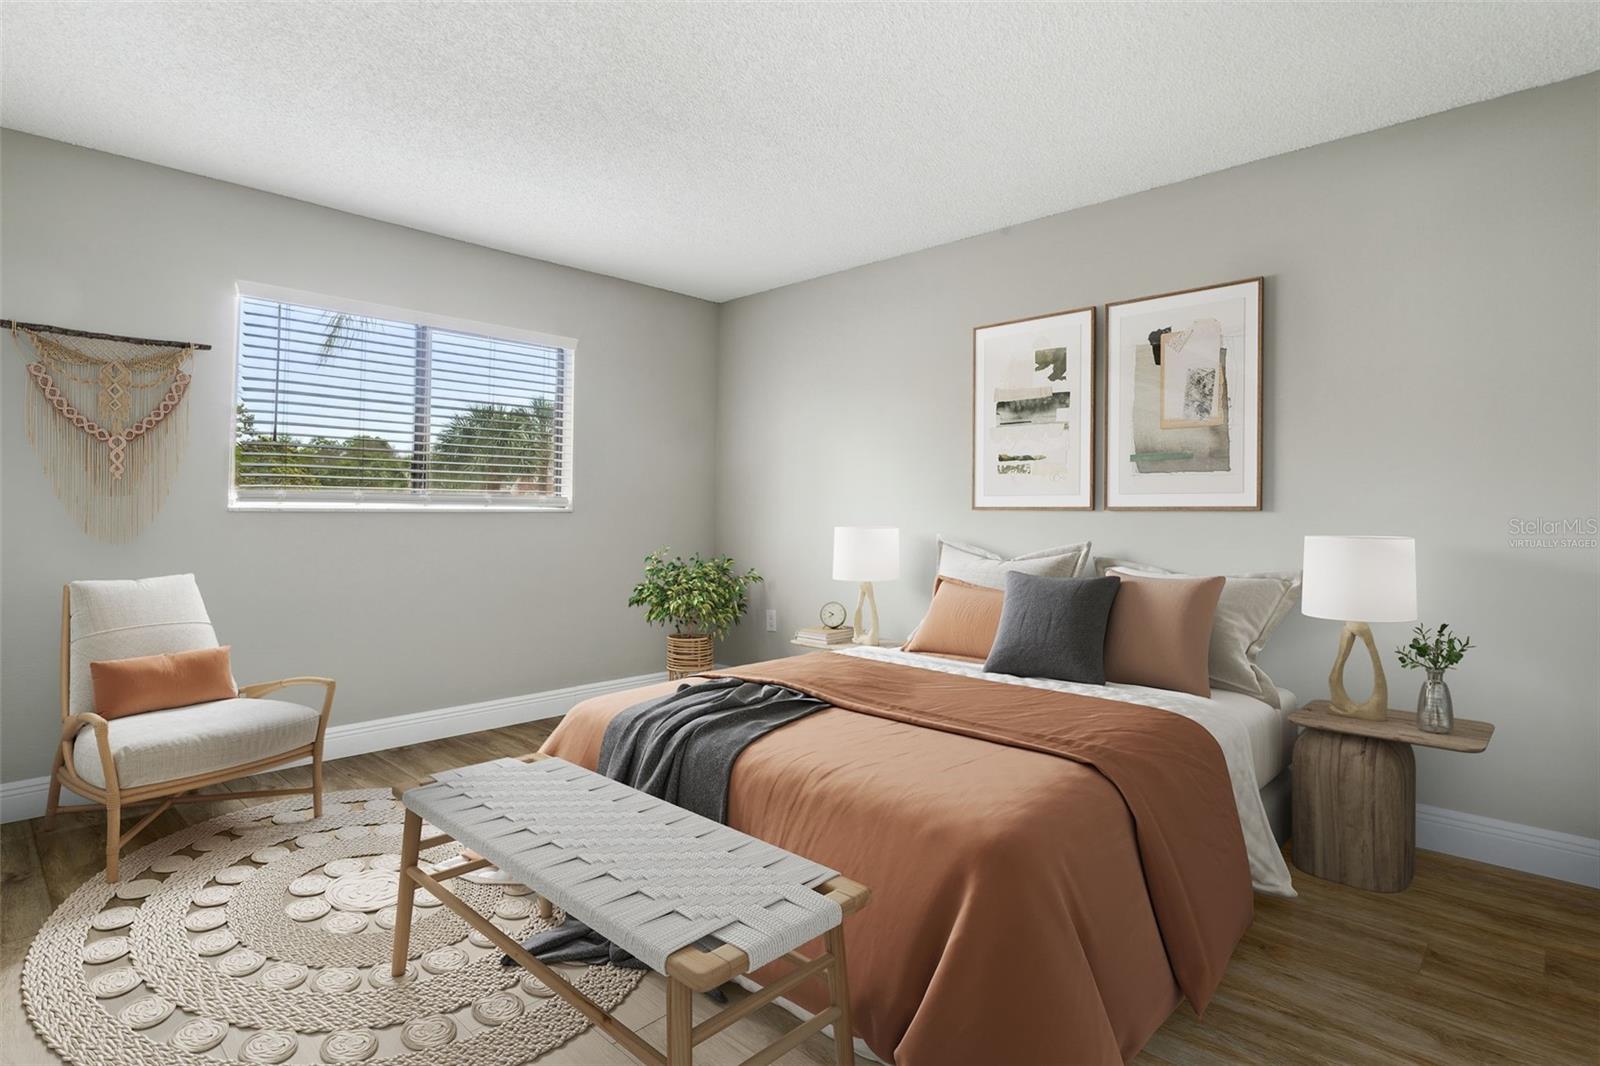 Virtually staged Primary bedroom is large and roomy with a double window to let in light. Yes a king bed could fit!The Primary has a large walk in closet and en-suite bathroom!